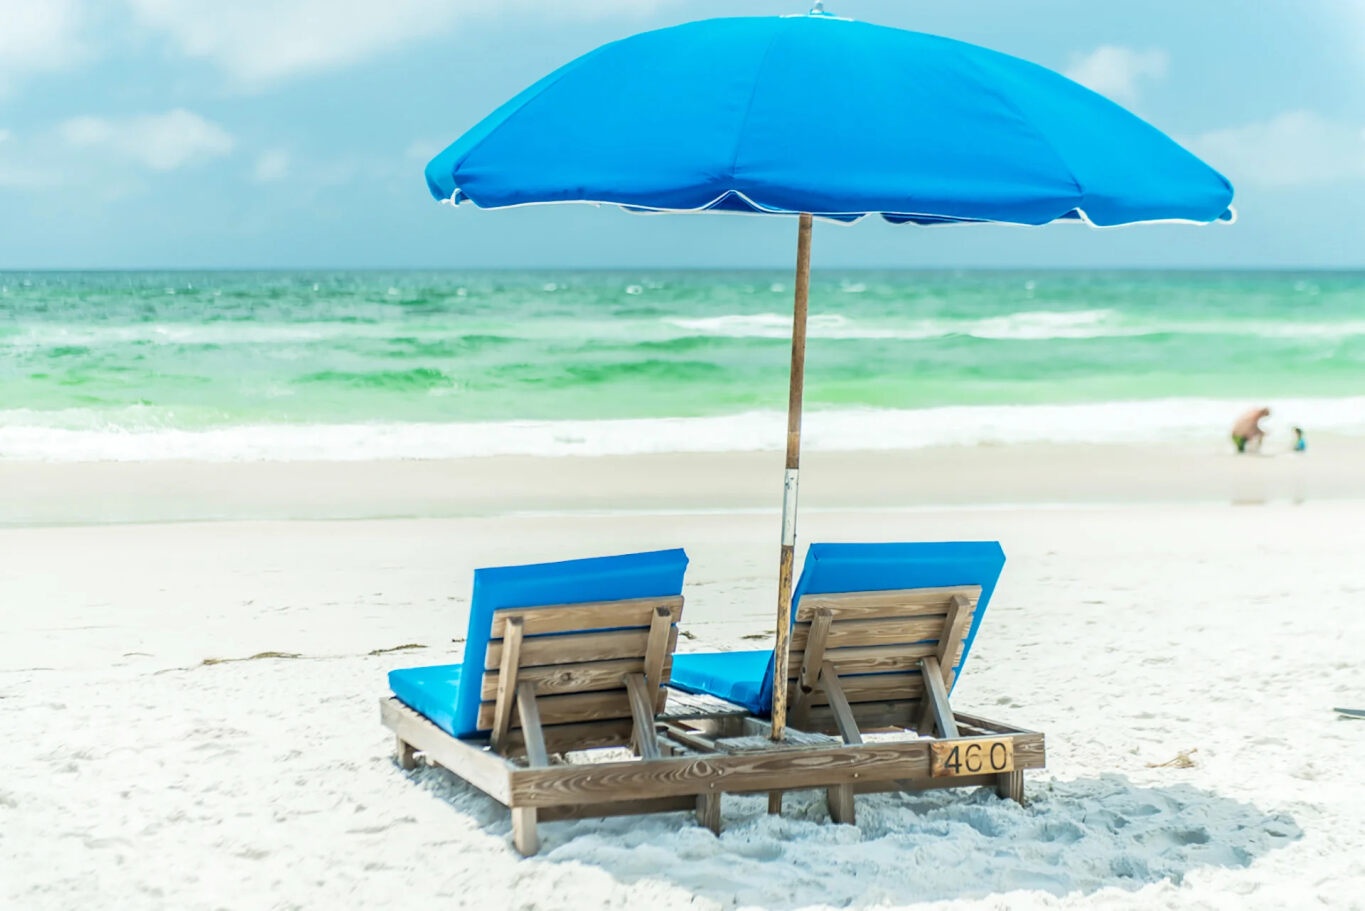 Soak in the sun & relax by the gulf during your stay